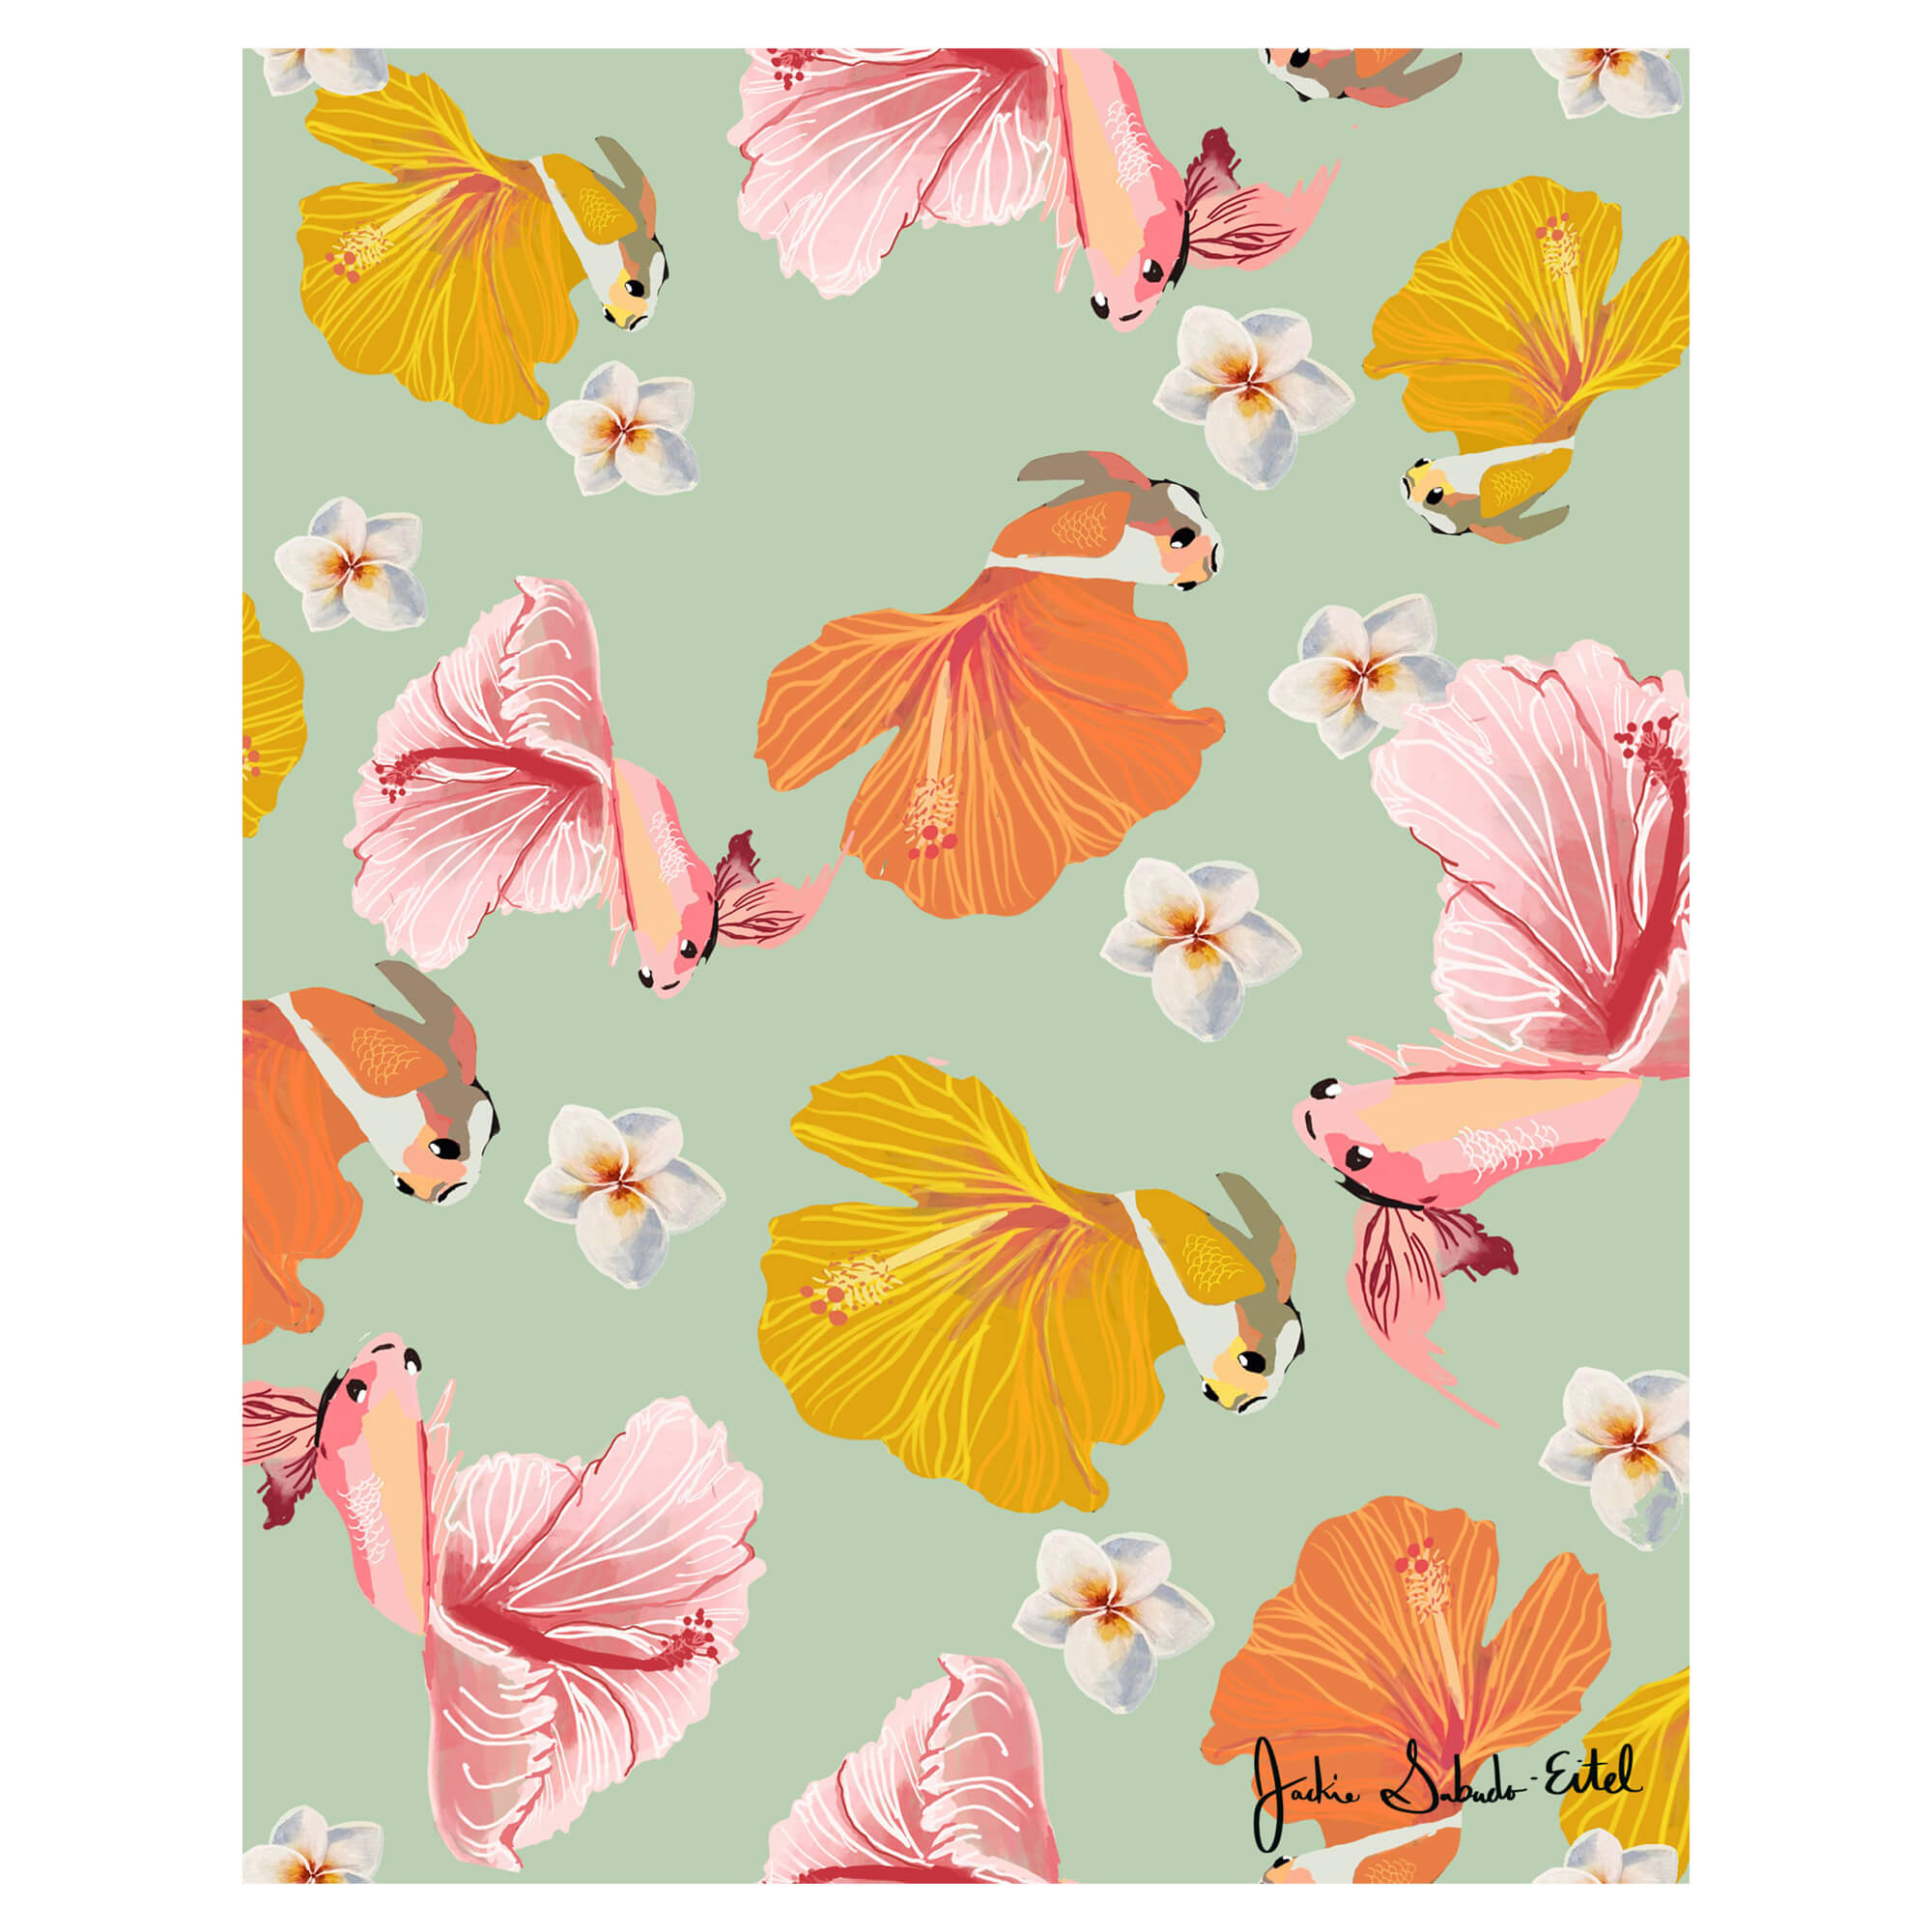 A canvas giclée print featuring colorful tropical fish with hibiscus flowers as tails and some beautiful plumerias by Hawaii artist Jackie Eitel